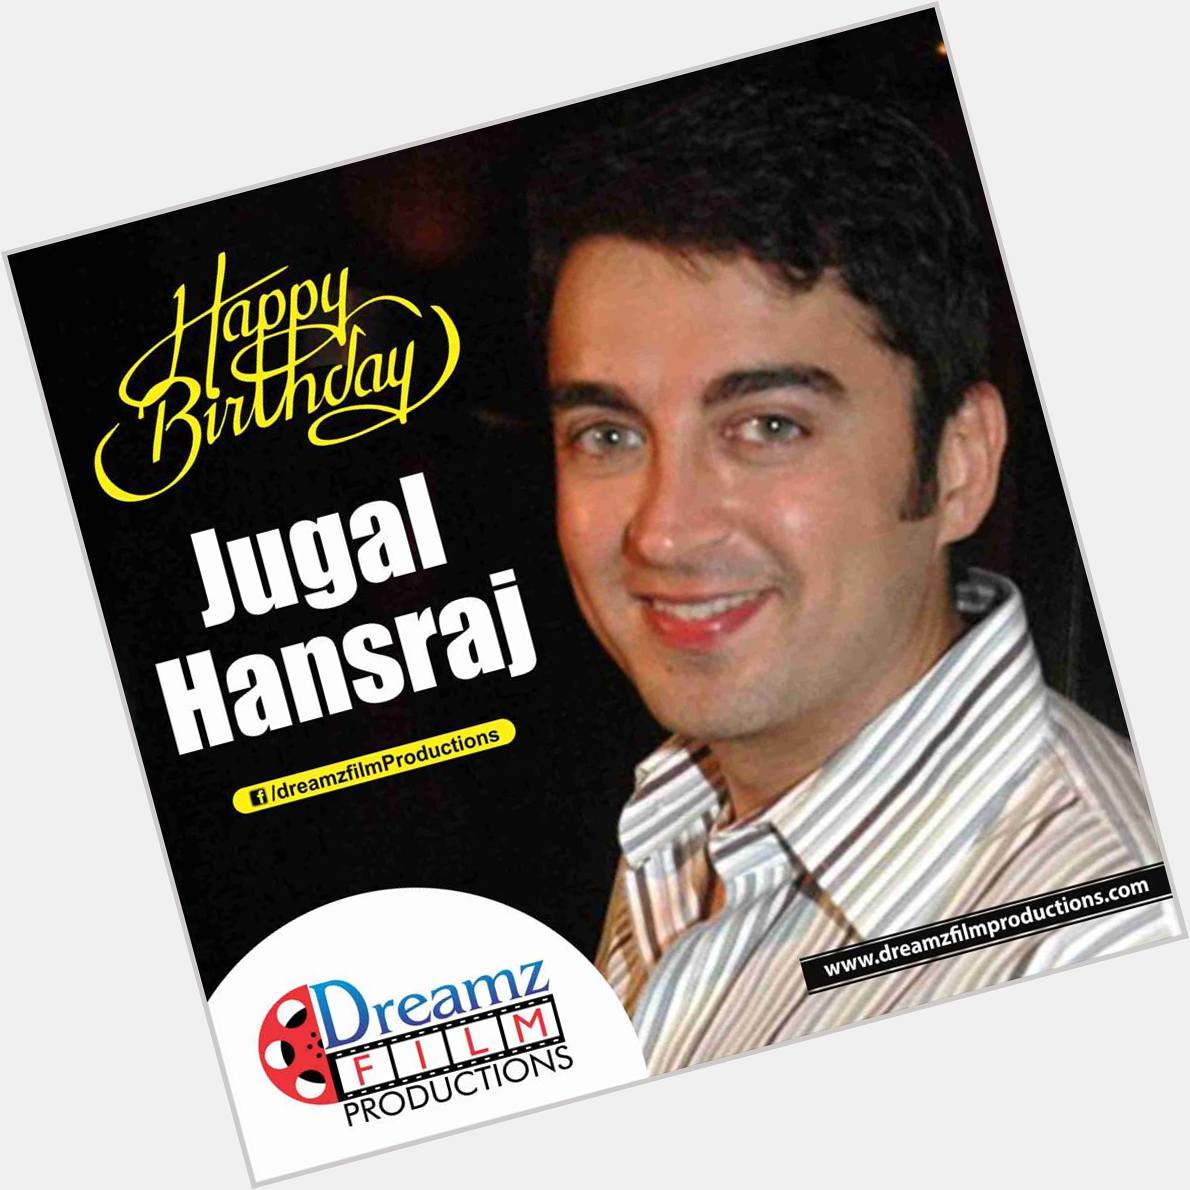  wishes a very  to Jugal Hansraj (Bollywood Actor) 